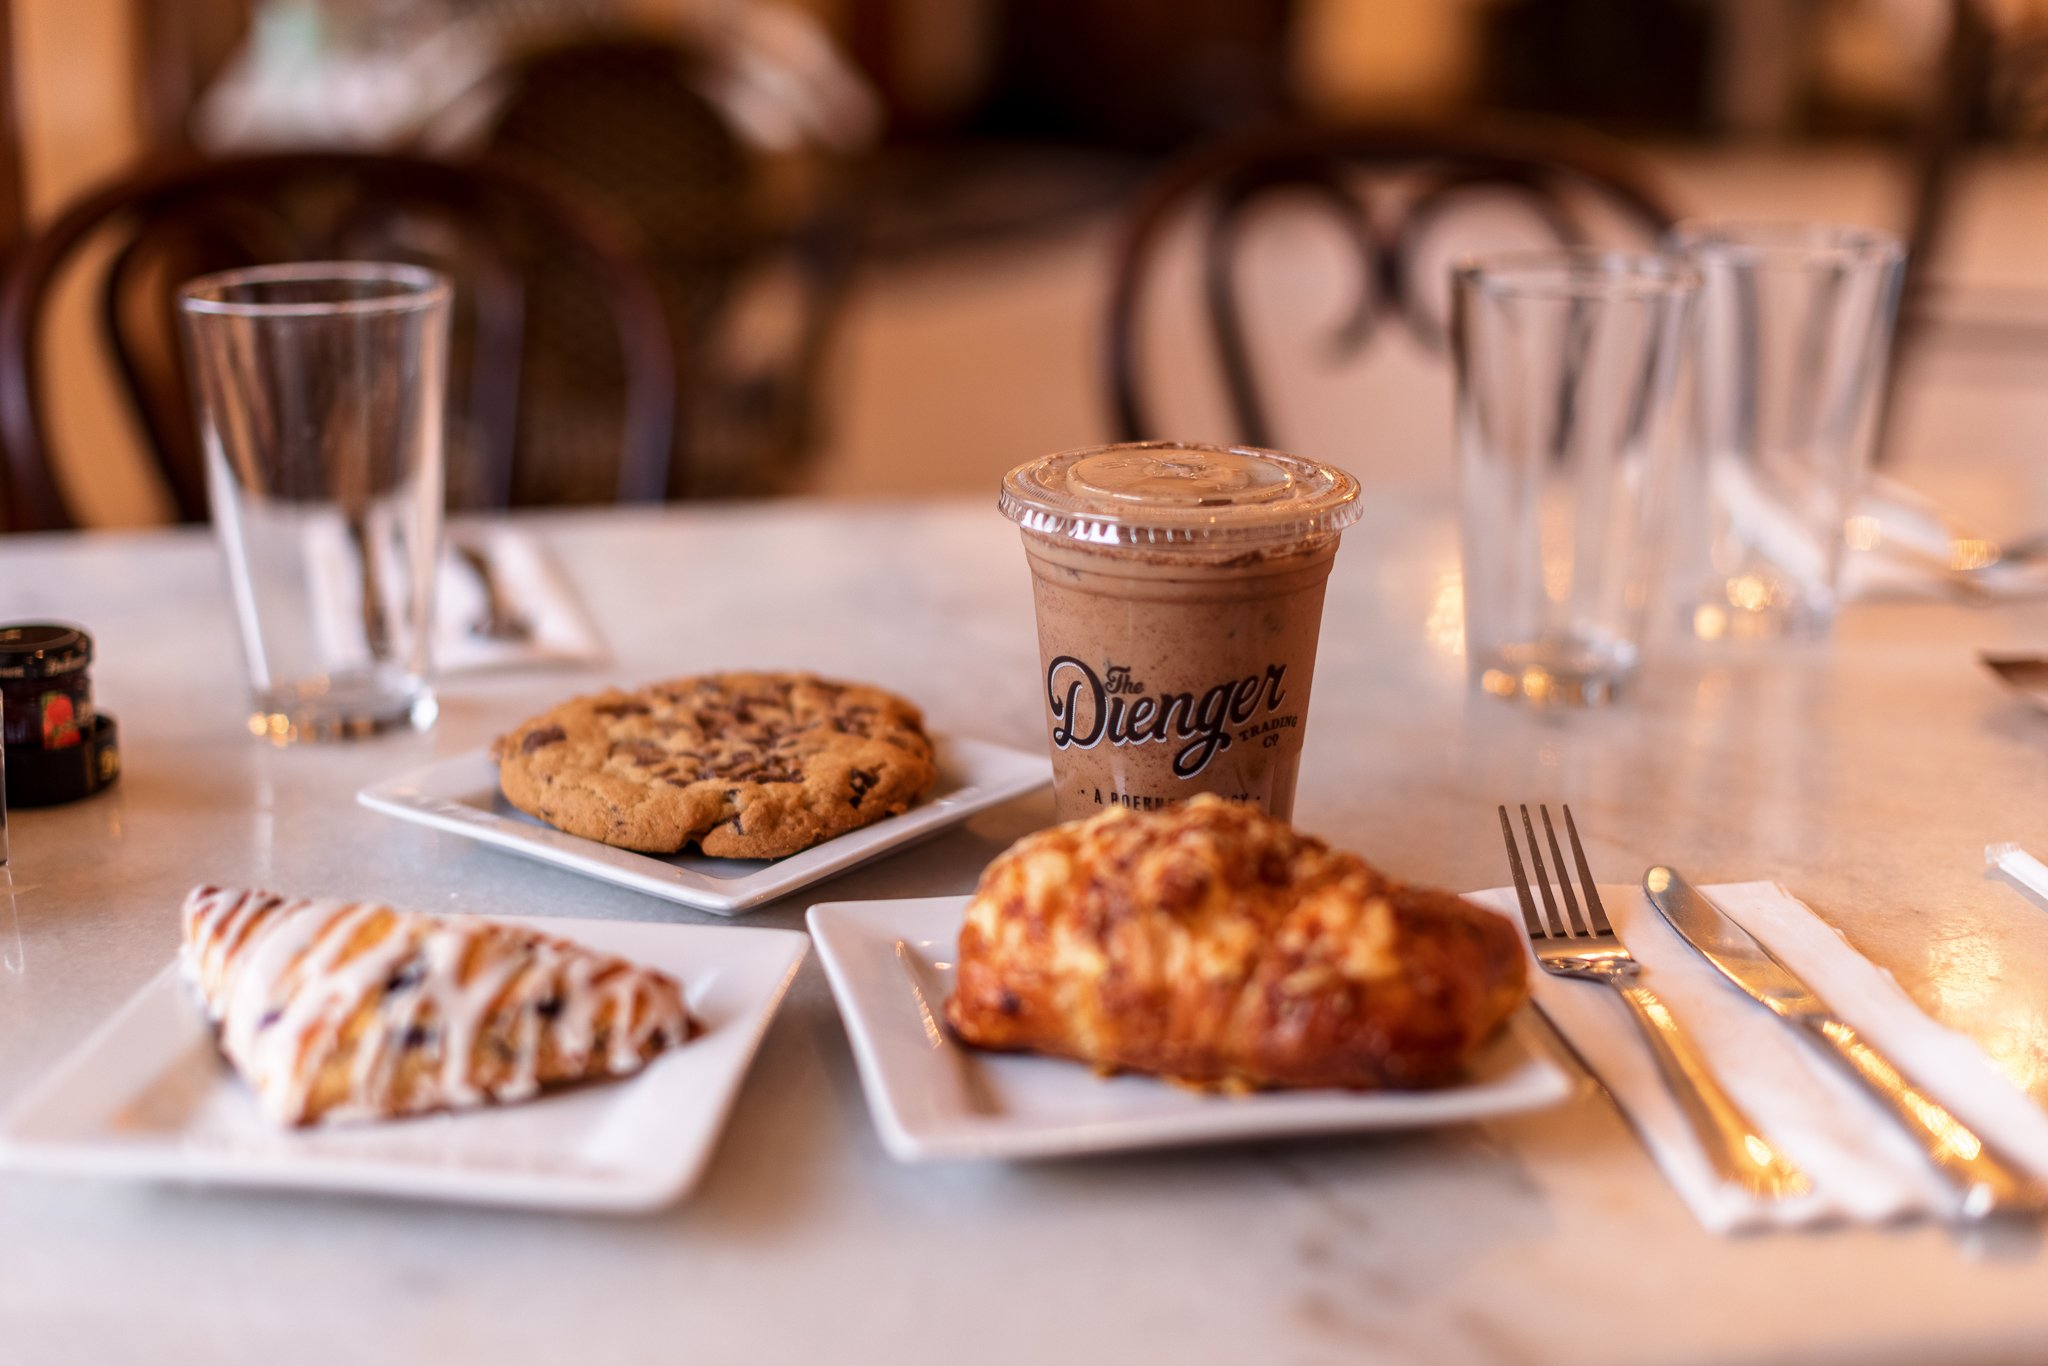 A iced coffee, scone, ham and cheese croissant, and a cookie on a table at The Dienger Trading Co. in Boerne, TX.